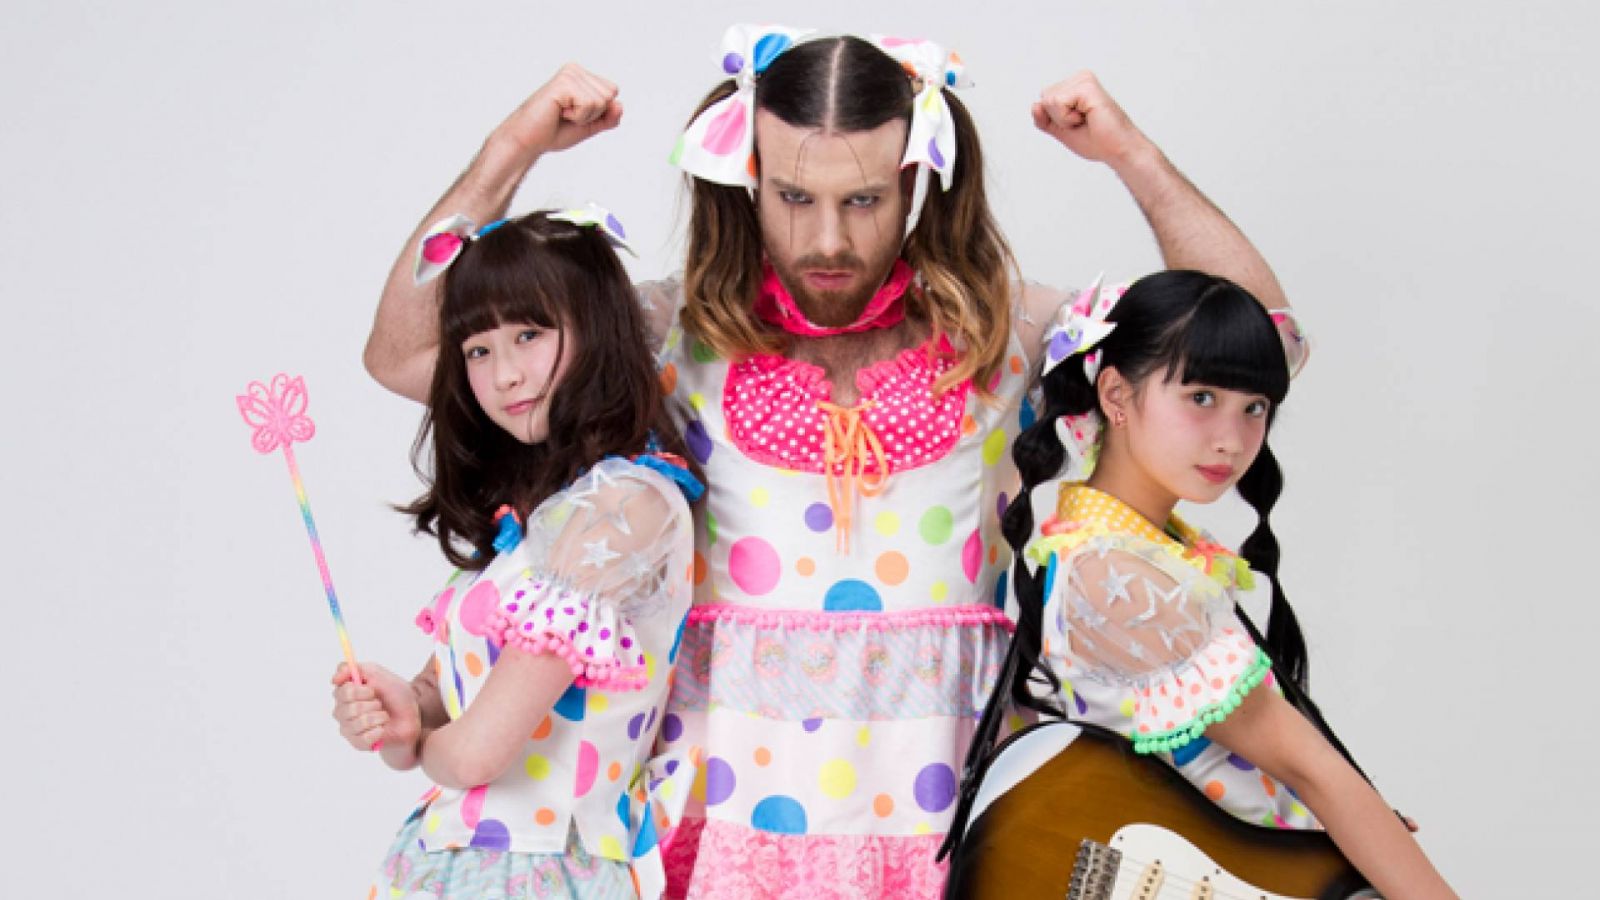 Interview with LADYBABY © 2015 clearstone Co., Ltd. All rights reserved.